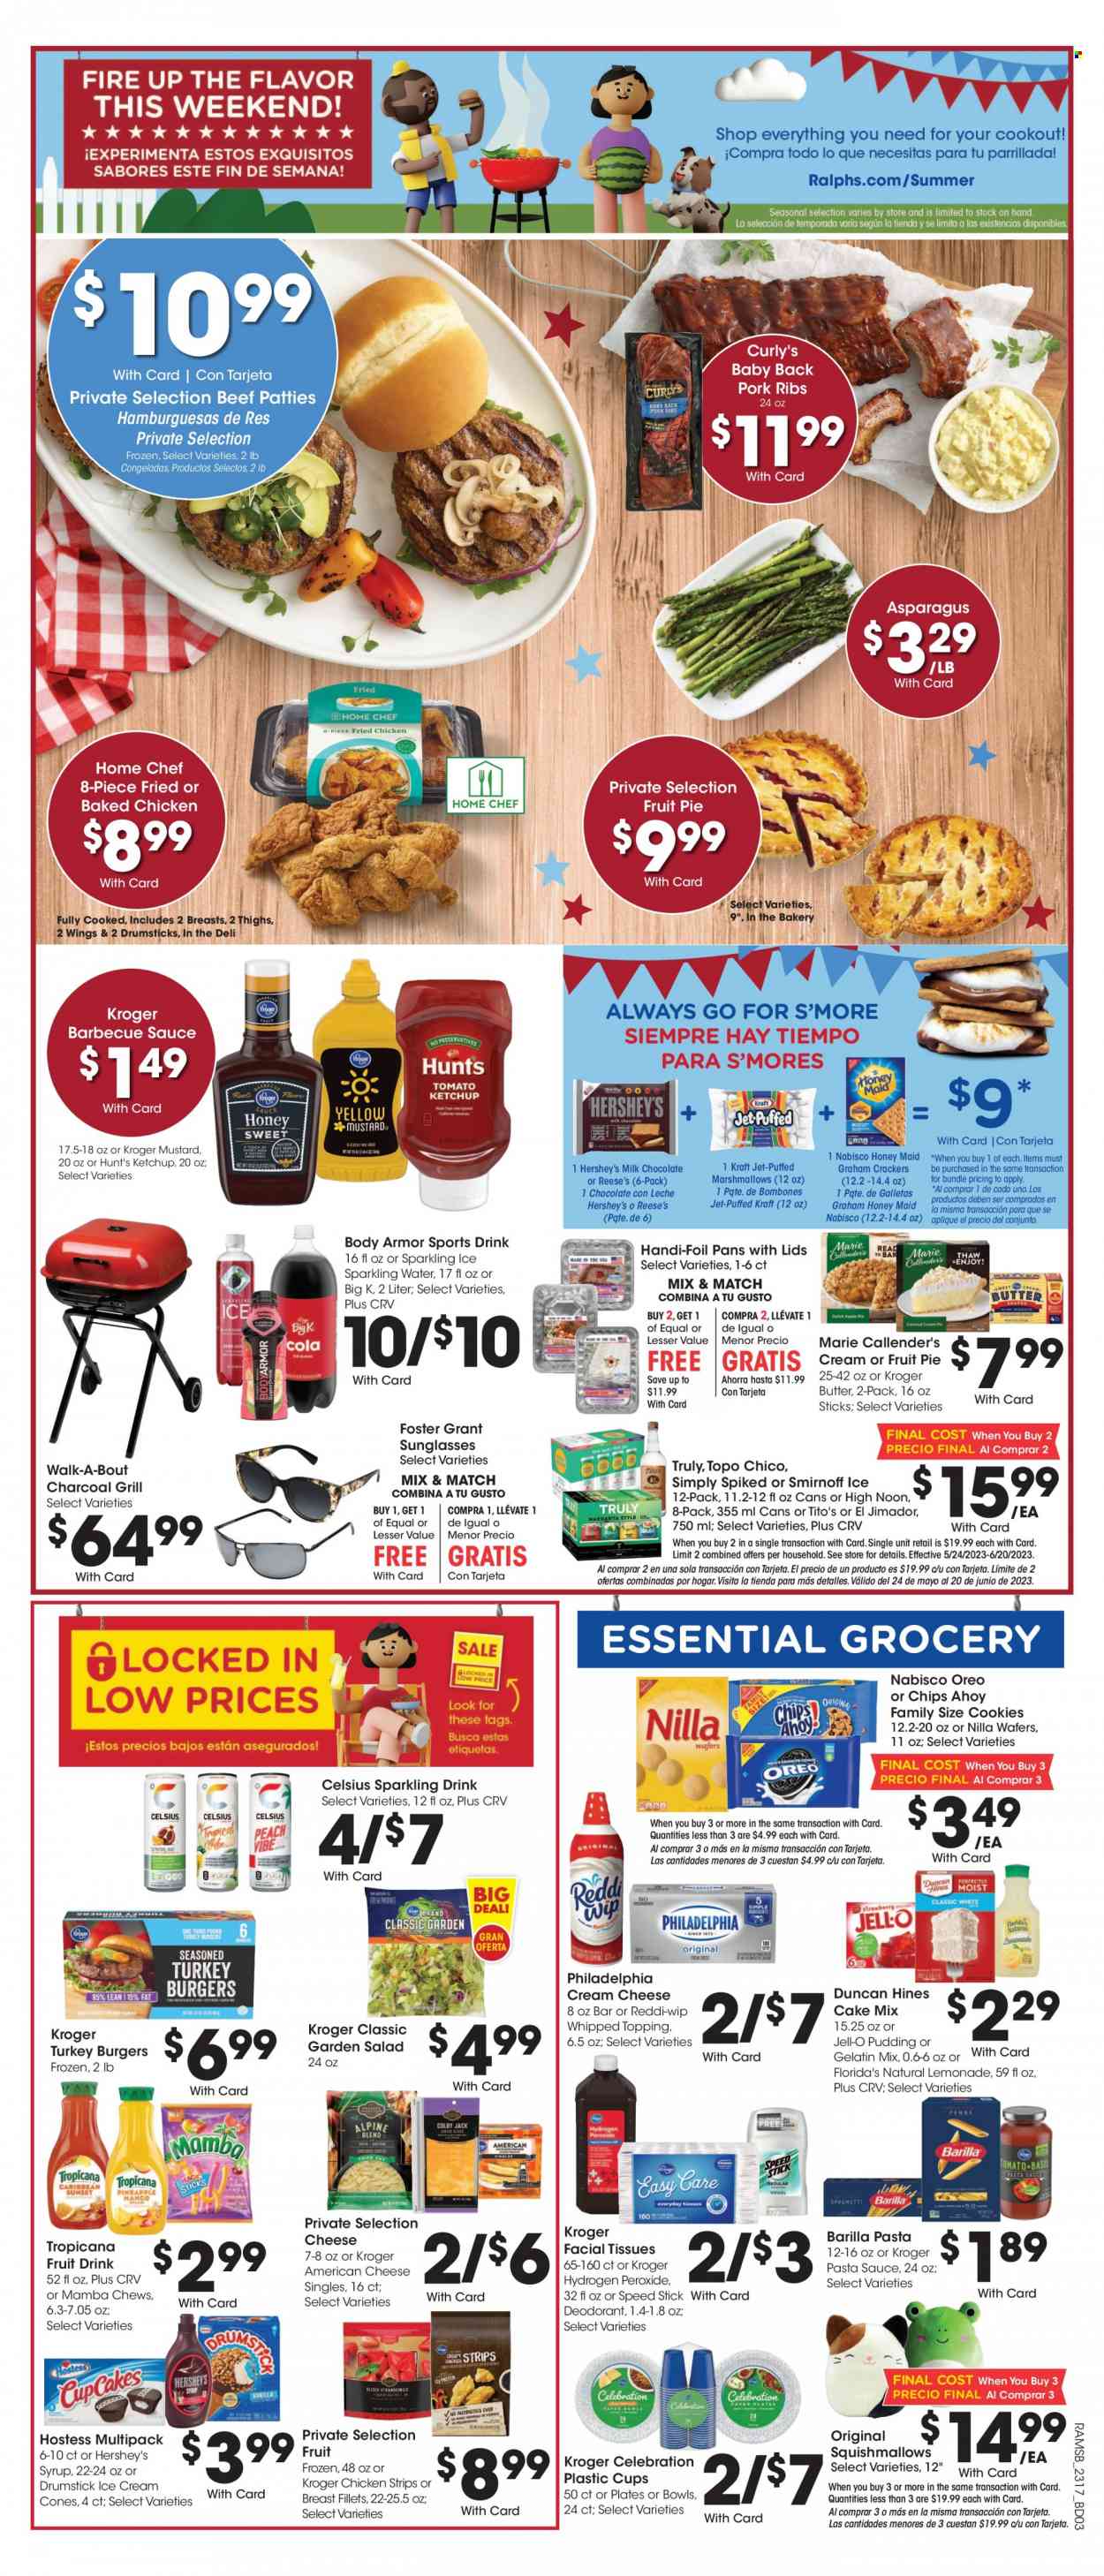 thumbnail - Ralphs Flyer - 05/24/2023 - 05/30/2023 - Sales products - pie, fruit pie, cake mix, asparagus, salad, pasta sauce, hamburger, fried chicken, Barilla, Marie Callender's, Kraft®, ready meal, american cheese, cream cheese, Philadelphia, pudding, ice cream, Reese's, Hershey's, strips, chicken strips, cookies, graham crackers, marshmallows, milk chocolate, wafers, Celebration, crackers, chewing gum, Florida's Natural, Nabisco, waffle cones, topping, Jell-O, Honey Maid, BBQ sauce, mustard, ketchup, syrup, lemonade, Body Armor, fruit drink, flavored water, sparkling water, water, Smirnoff, TRULY, Topo Chico, turkey, ribs, turkey burger, pork meat, pork ribs, pork back ribs, tissues, Jet, facial tissues, anti-perspirant, Speed Stick, deodorant, plate, sunglasses, Squishmallows, grill. Page 3.